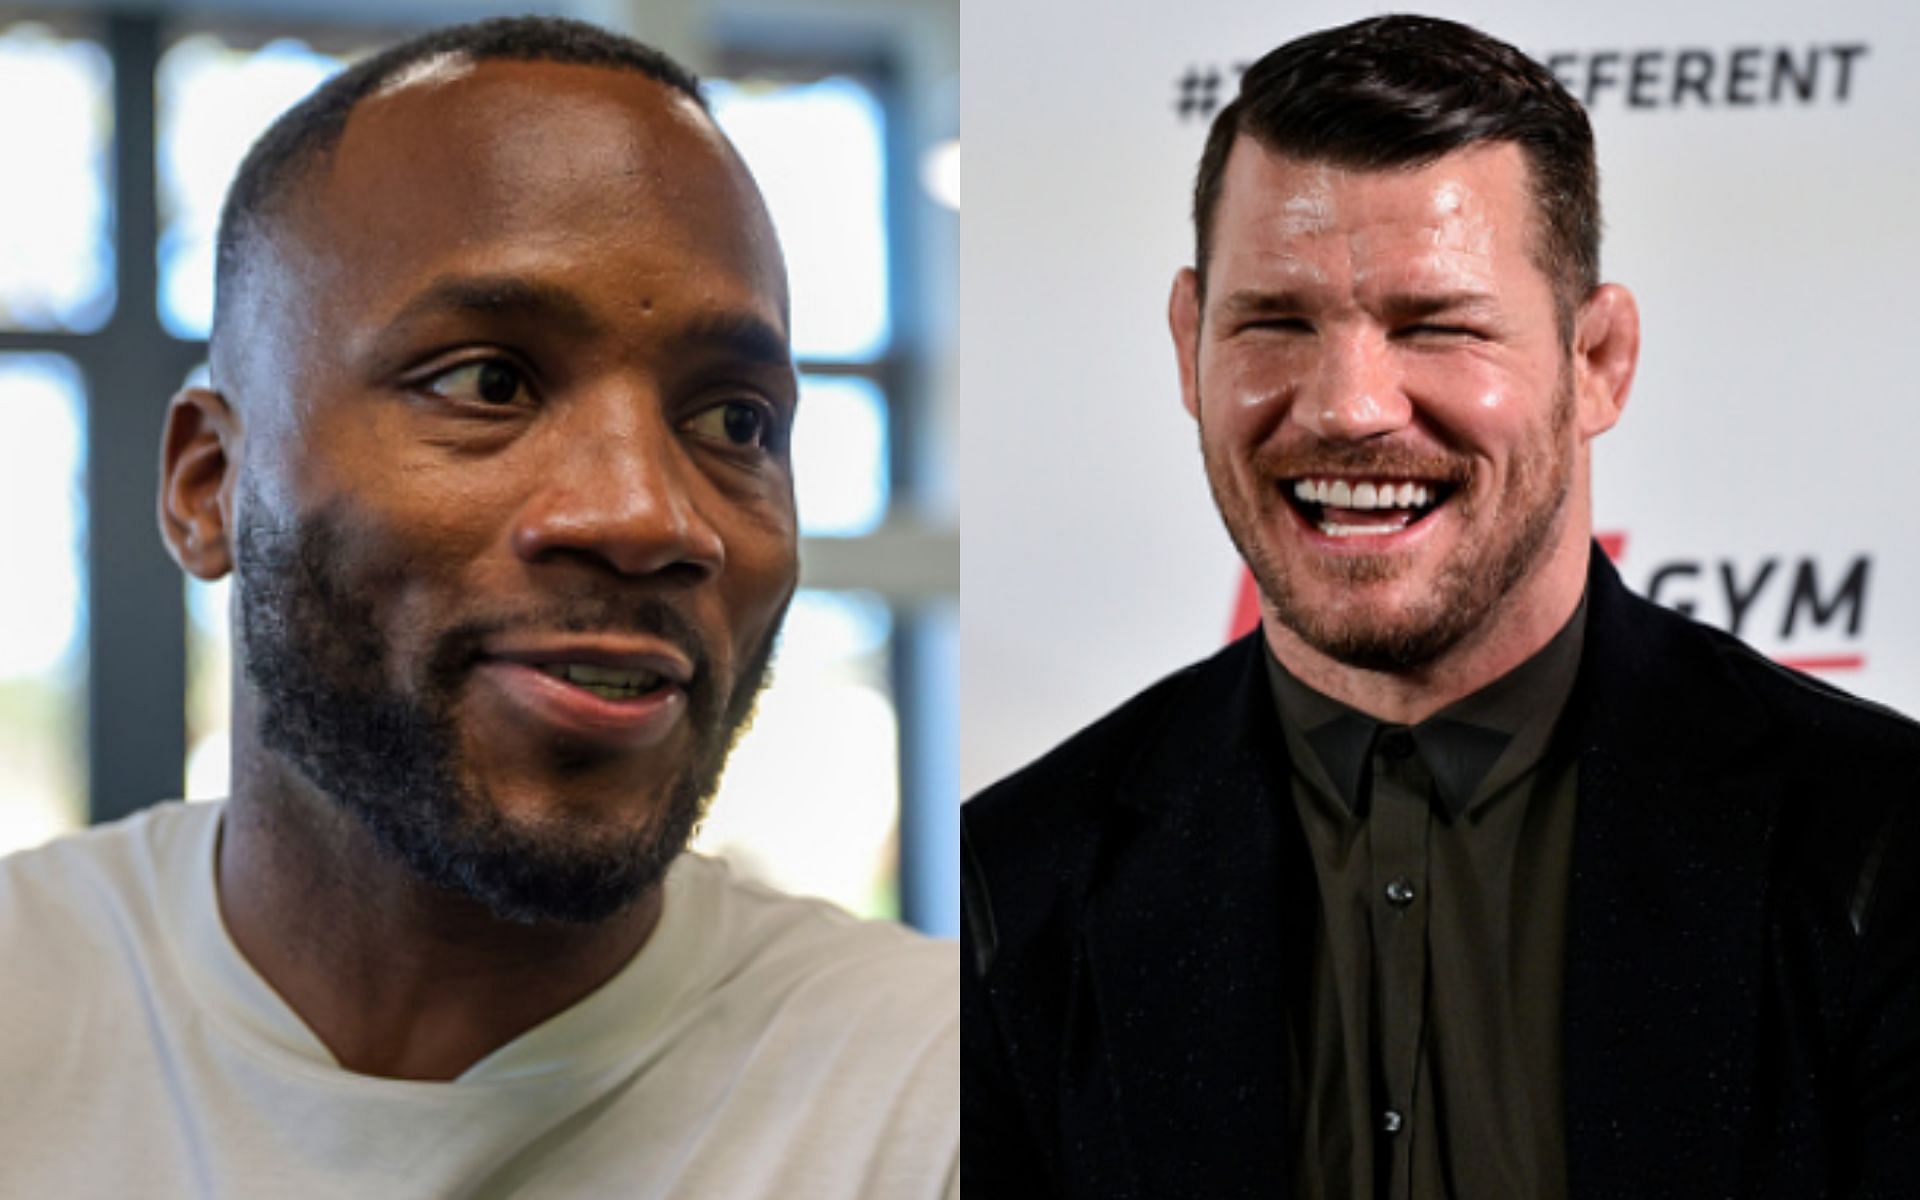 Leon Edwards (left); Michael Bisping (right)